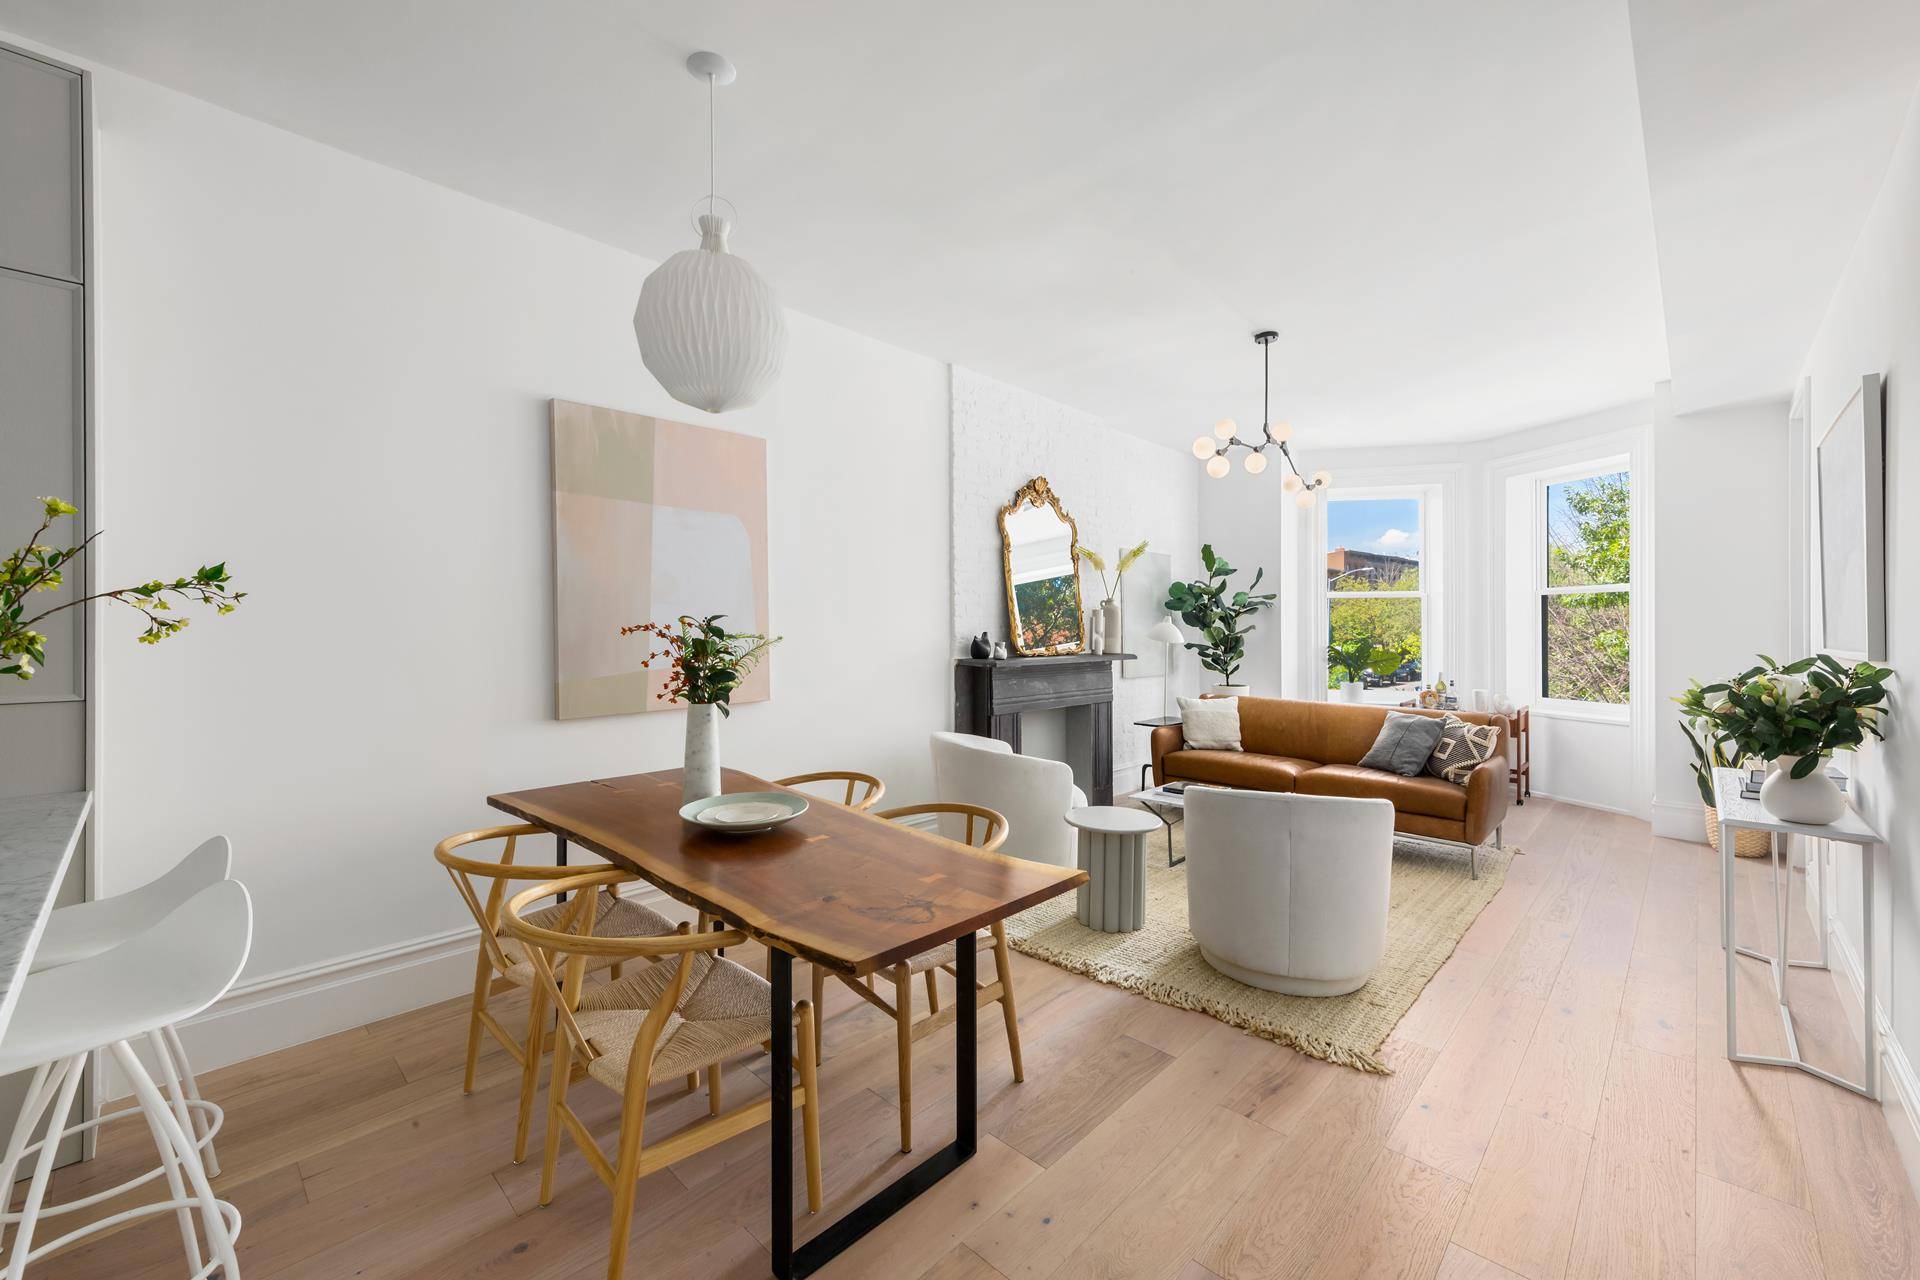 Nestled on a uniquely quiet and sunny block in Carroll Gardens 349 Hoyt Street is a historic brick building that has been impeccably reimagined as four new condominium homes.